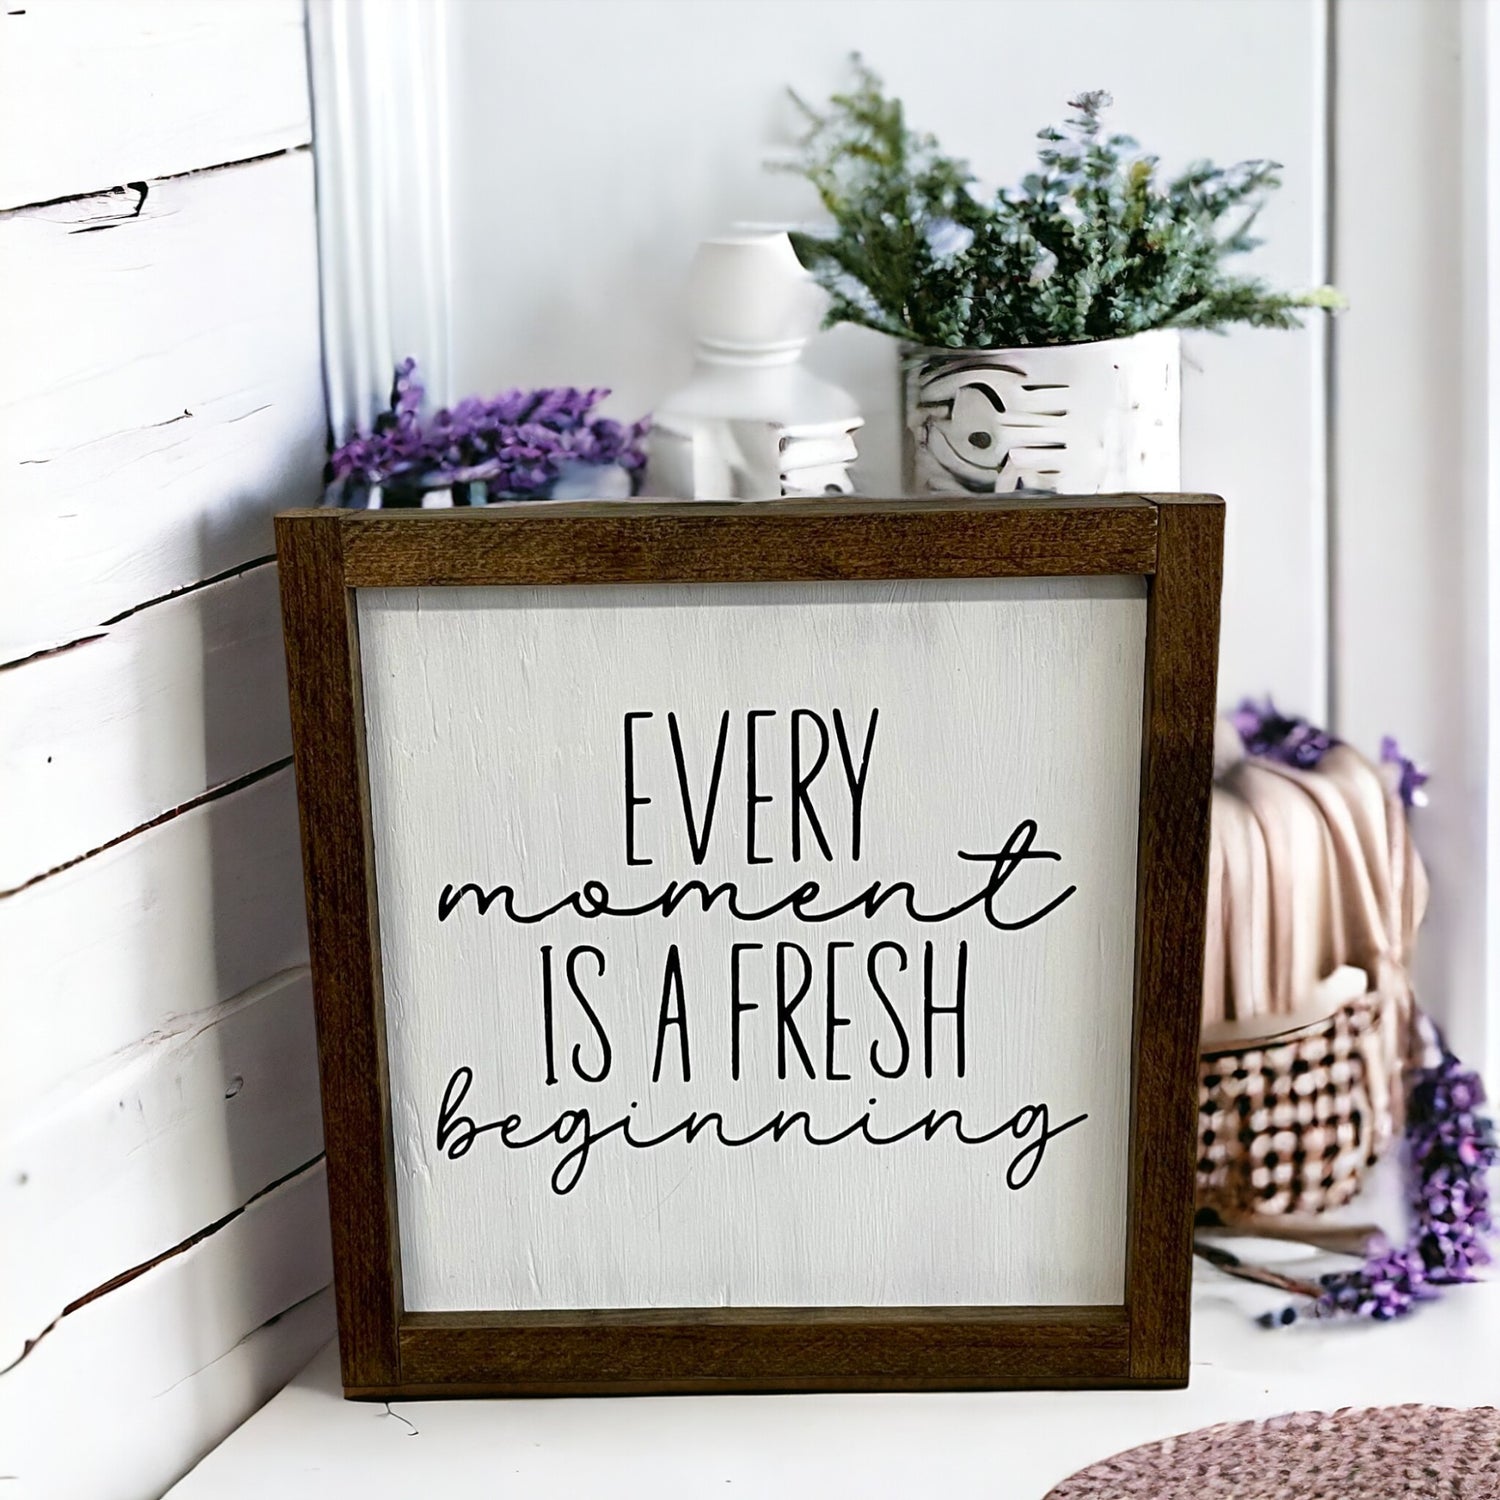 Handmade 9.5" x 9.5" wooden sign with the inspirational quote "Every Moment is a Fresh Beginning" in elegant script, perfect for adding rustic charm and positivity to any room.